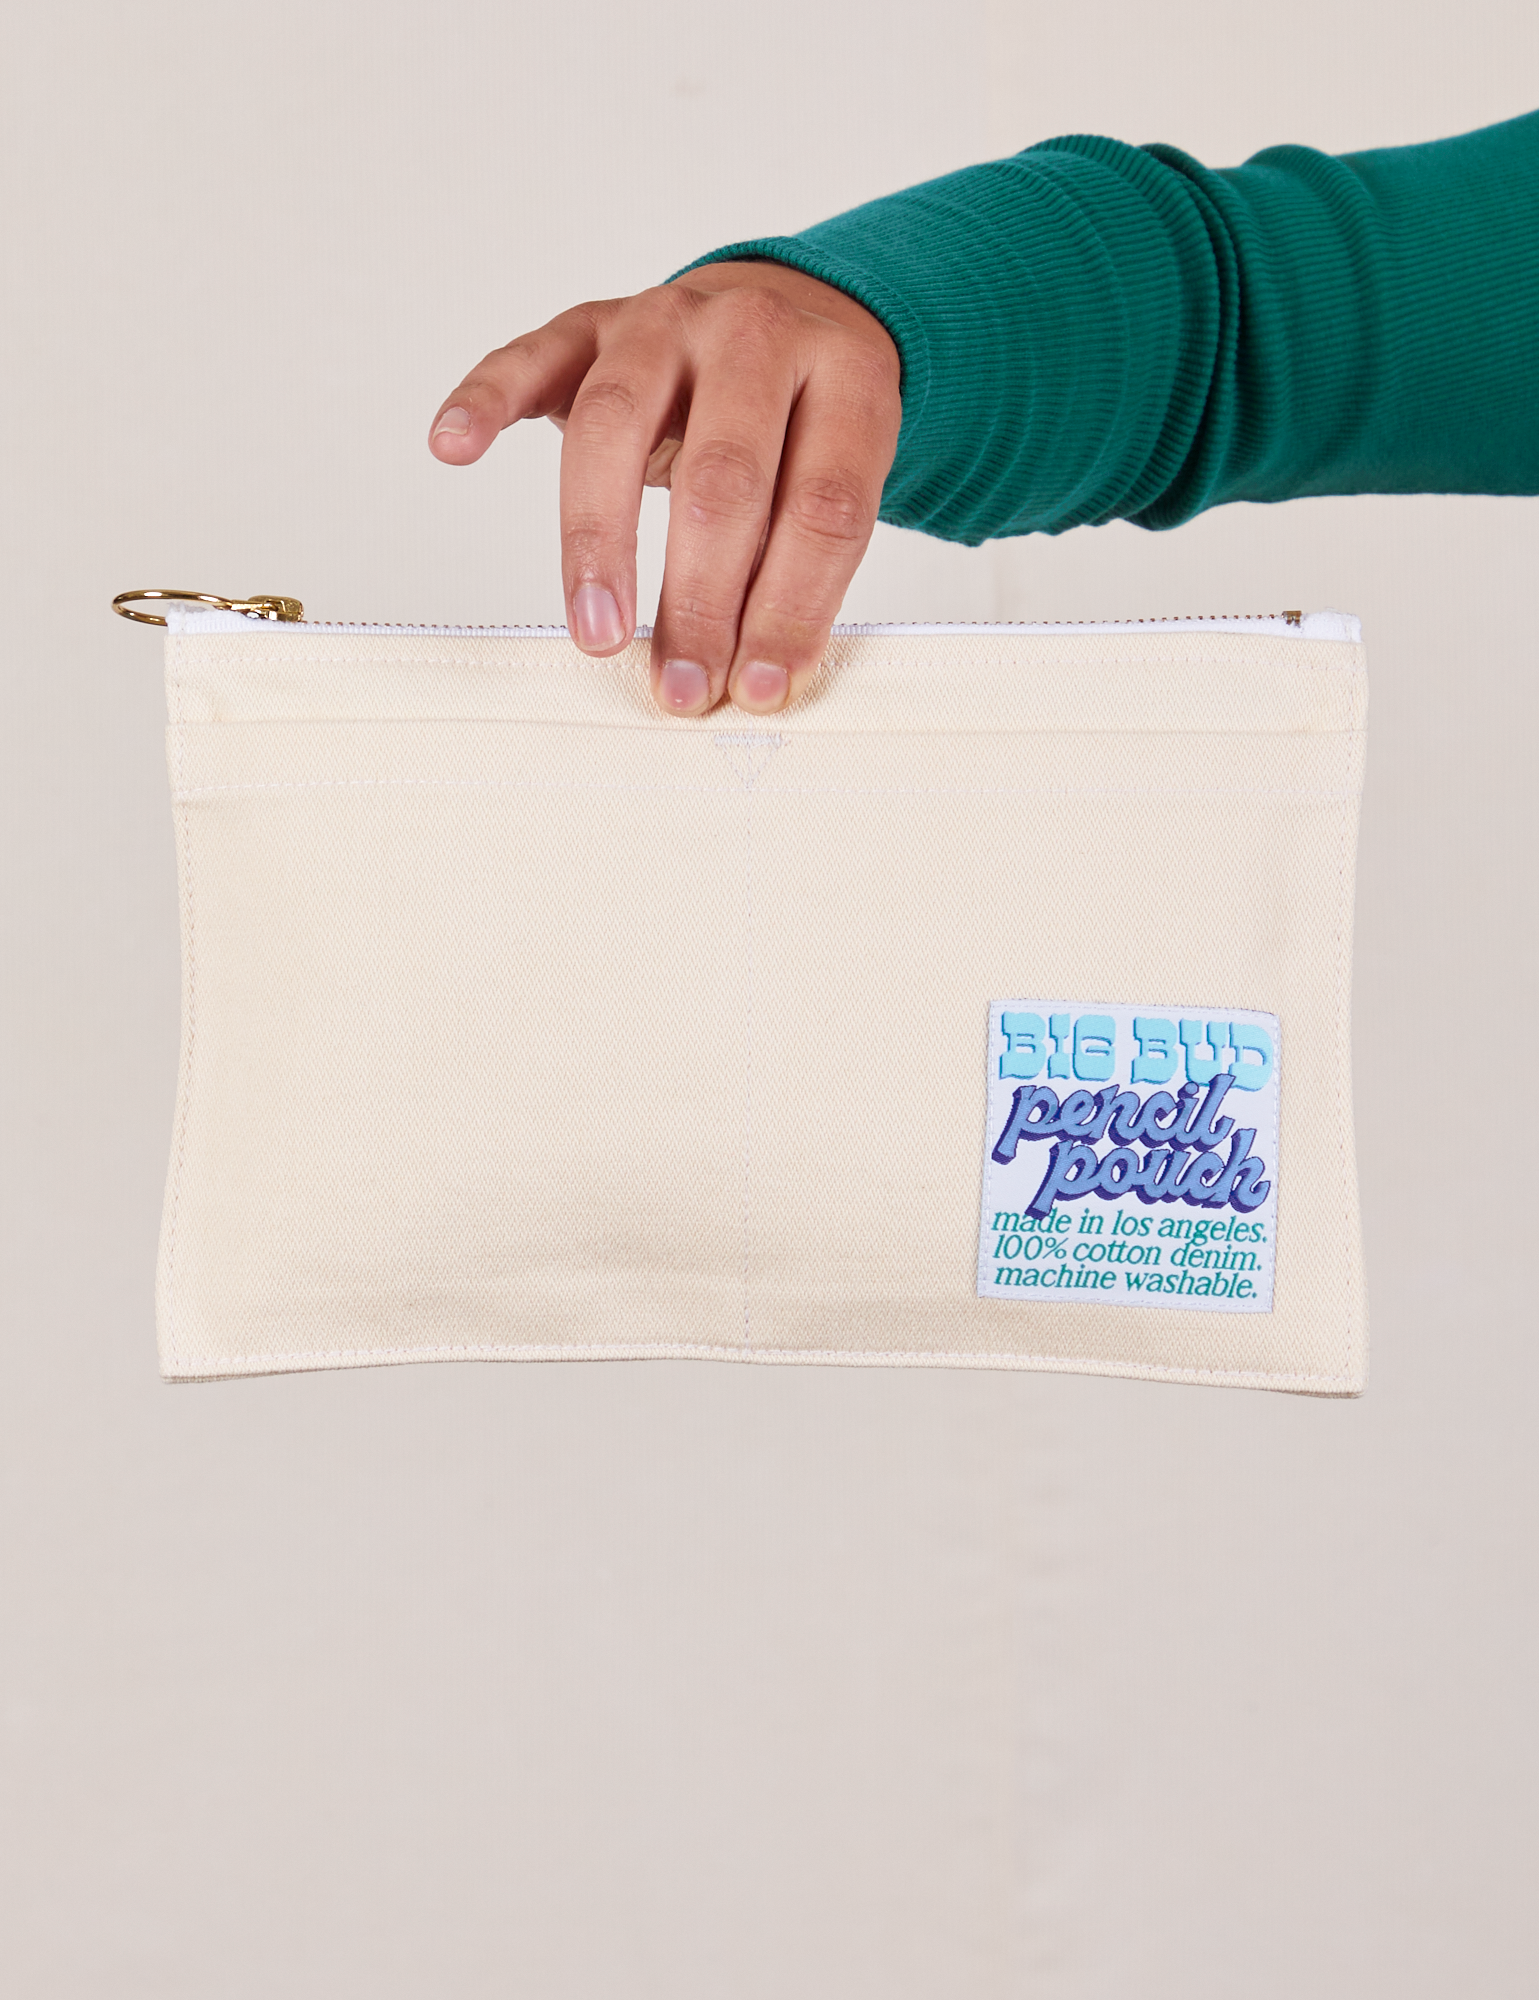 Pencil Pouch in Vintage Off-White held by model